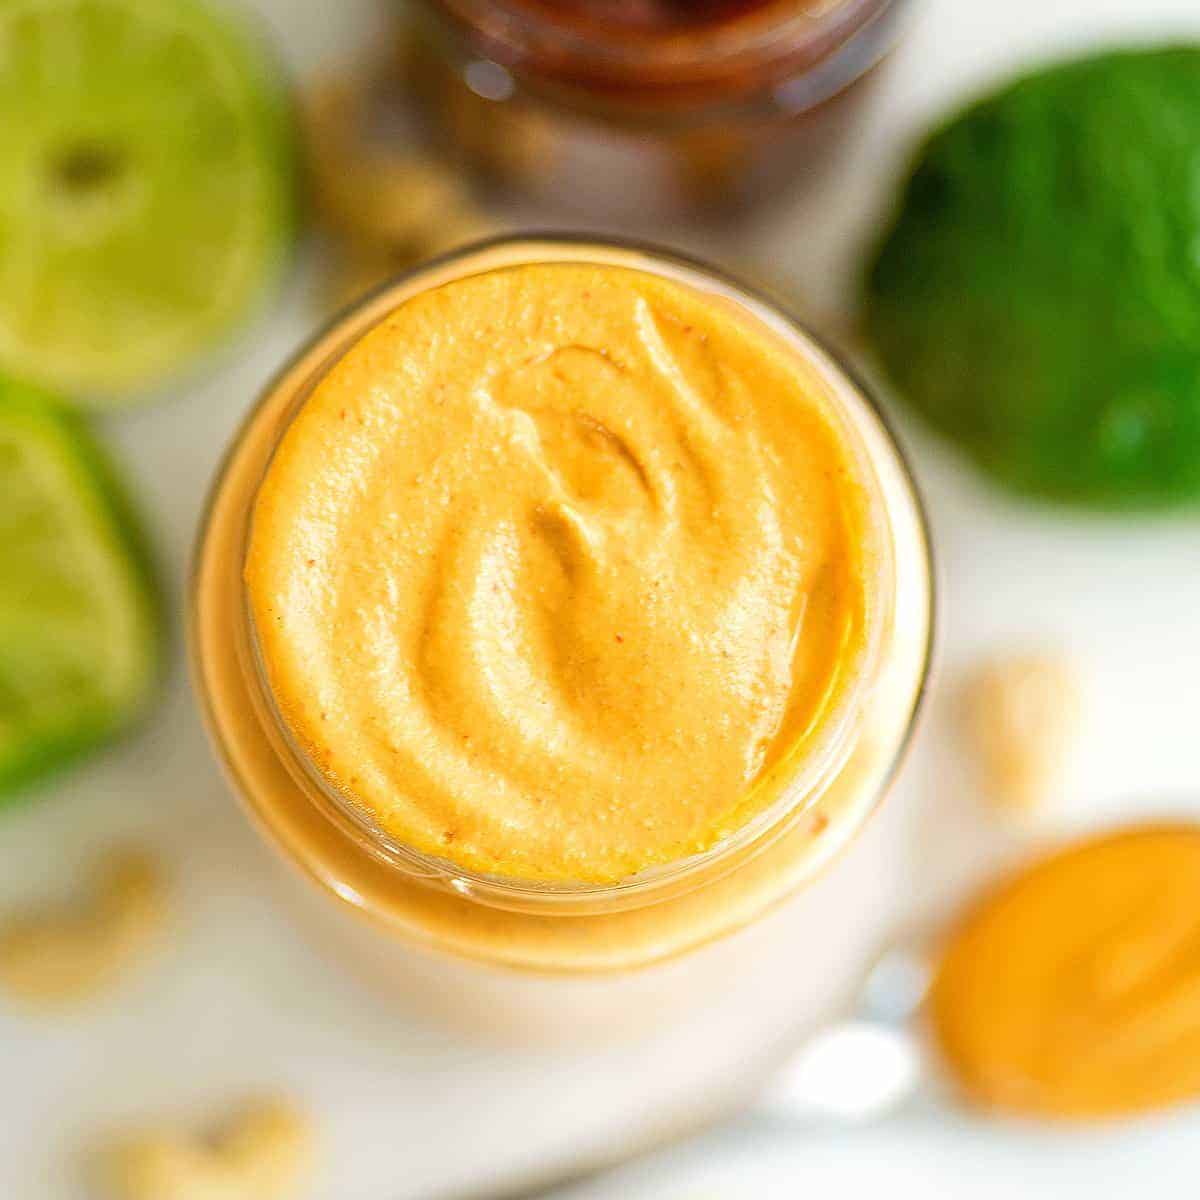 Vegan Chipotle Mayo The Perfect Creamy Spicy Sauce